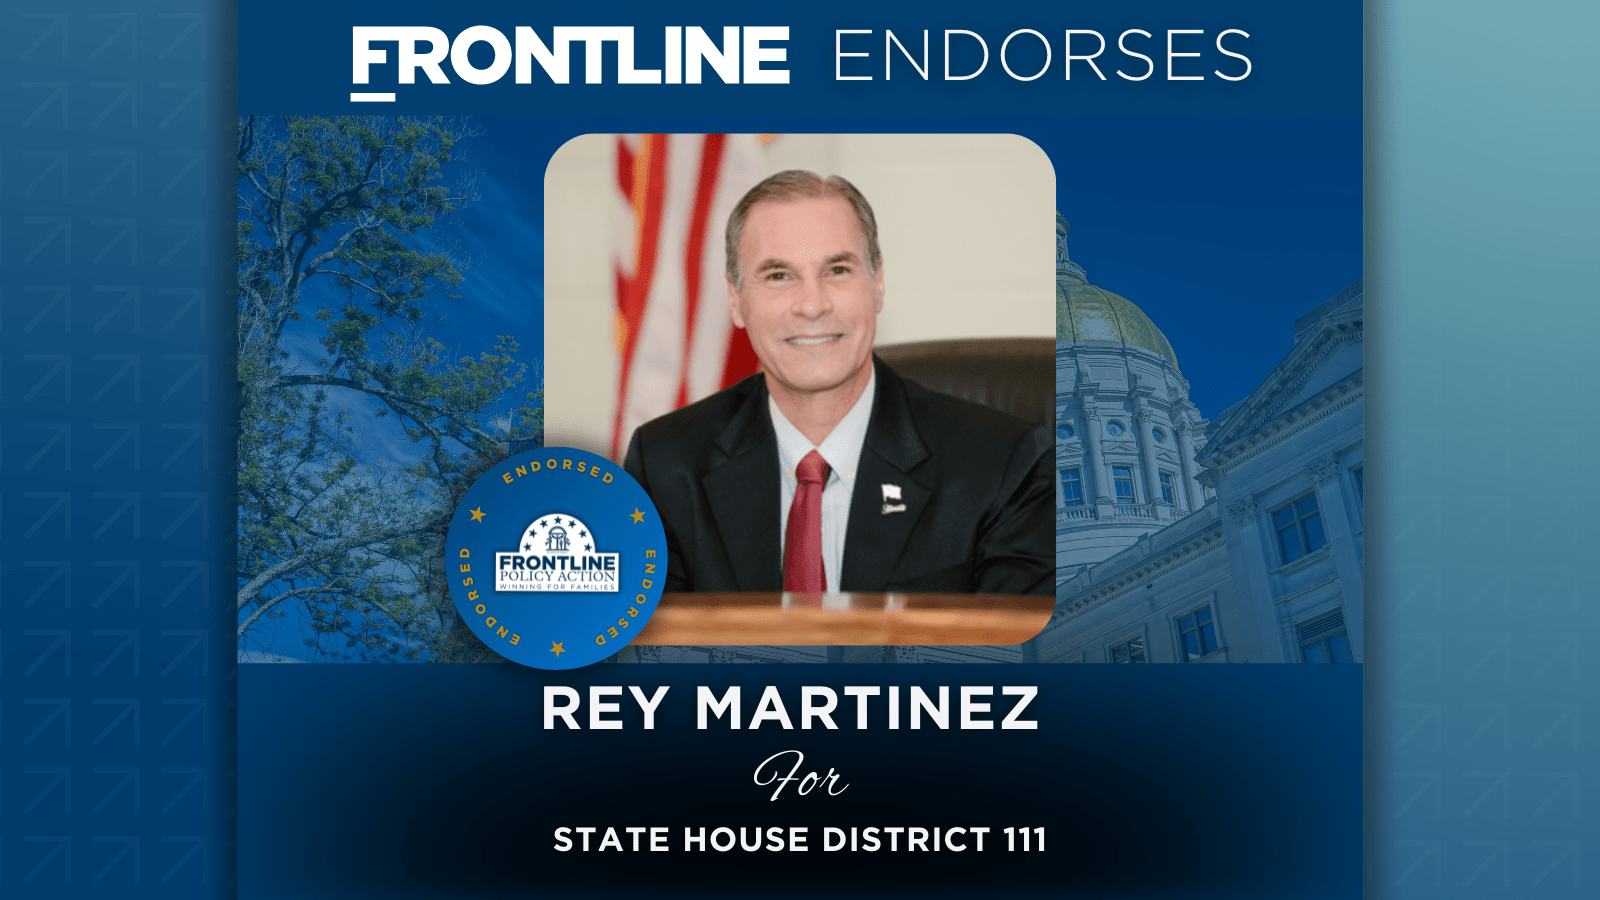 BREAKING: Frontline Endorses Rey Martinez for State House District 111